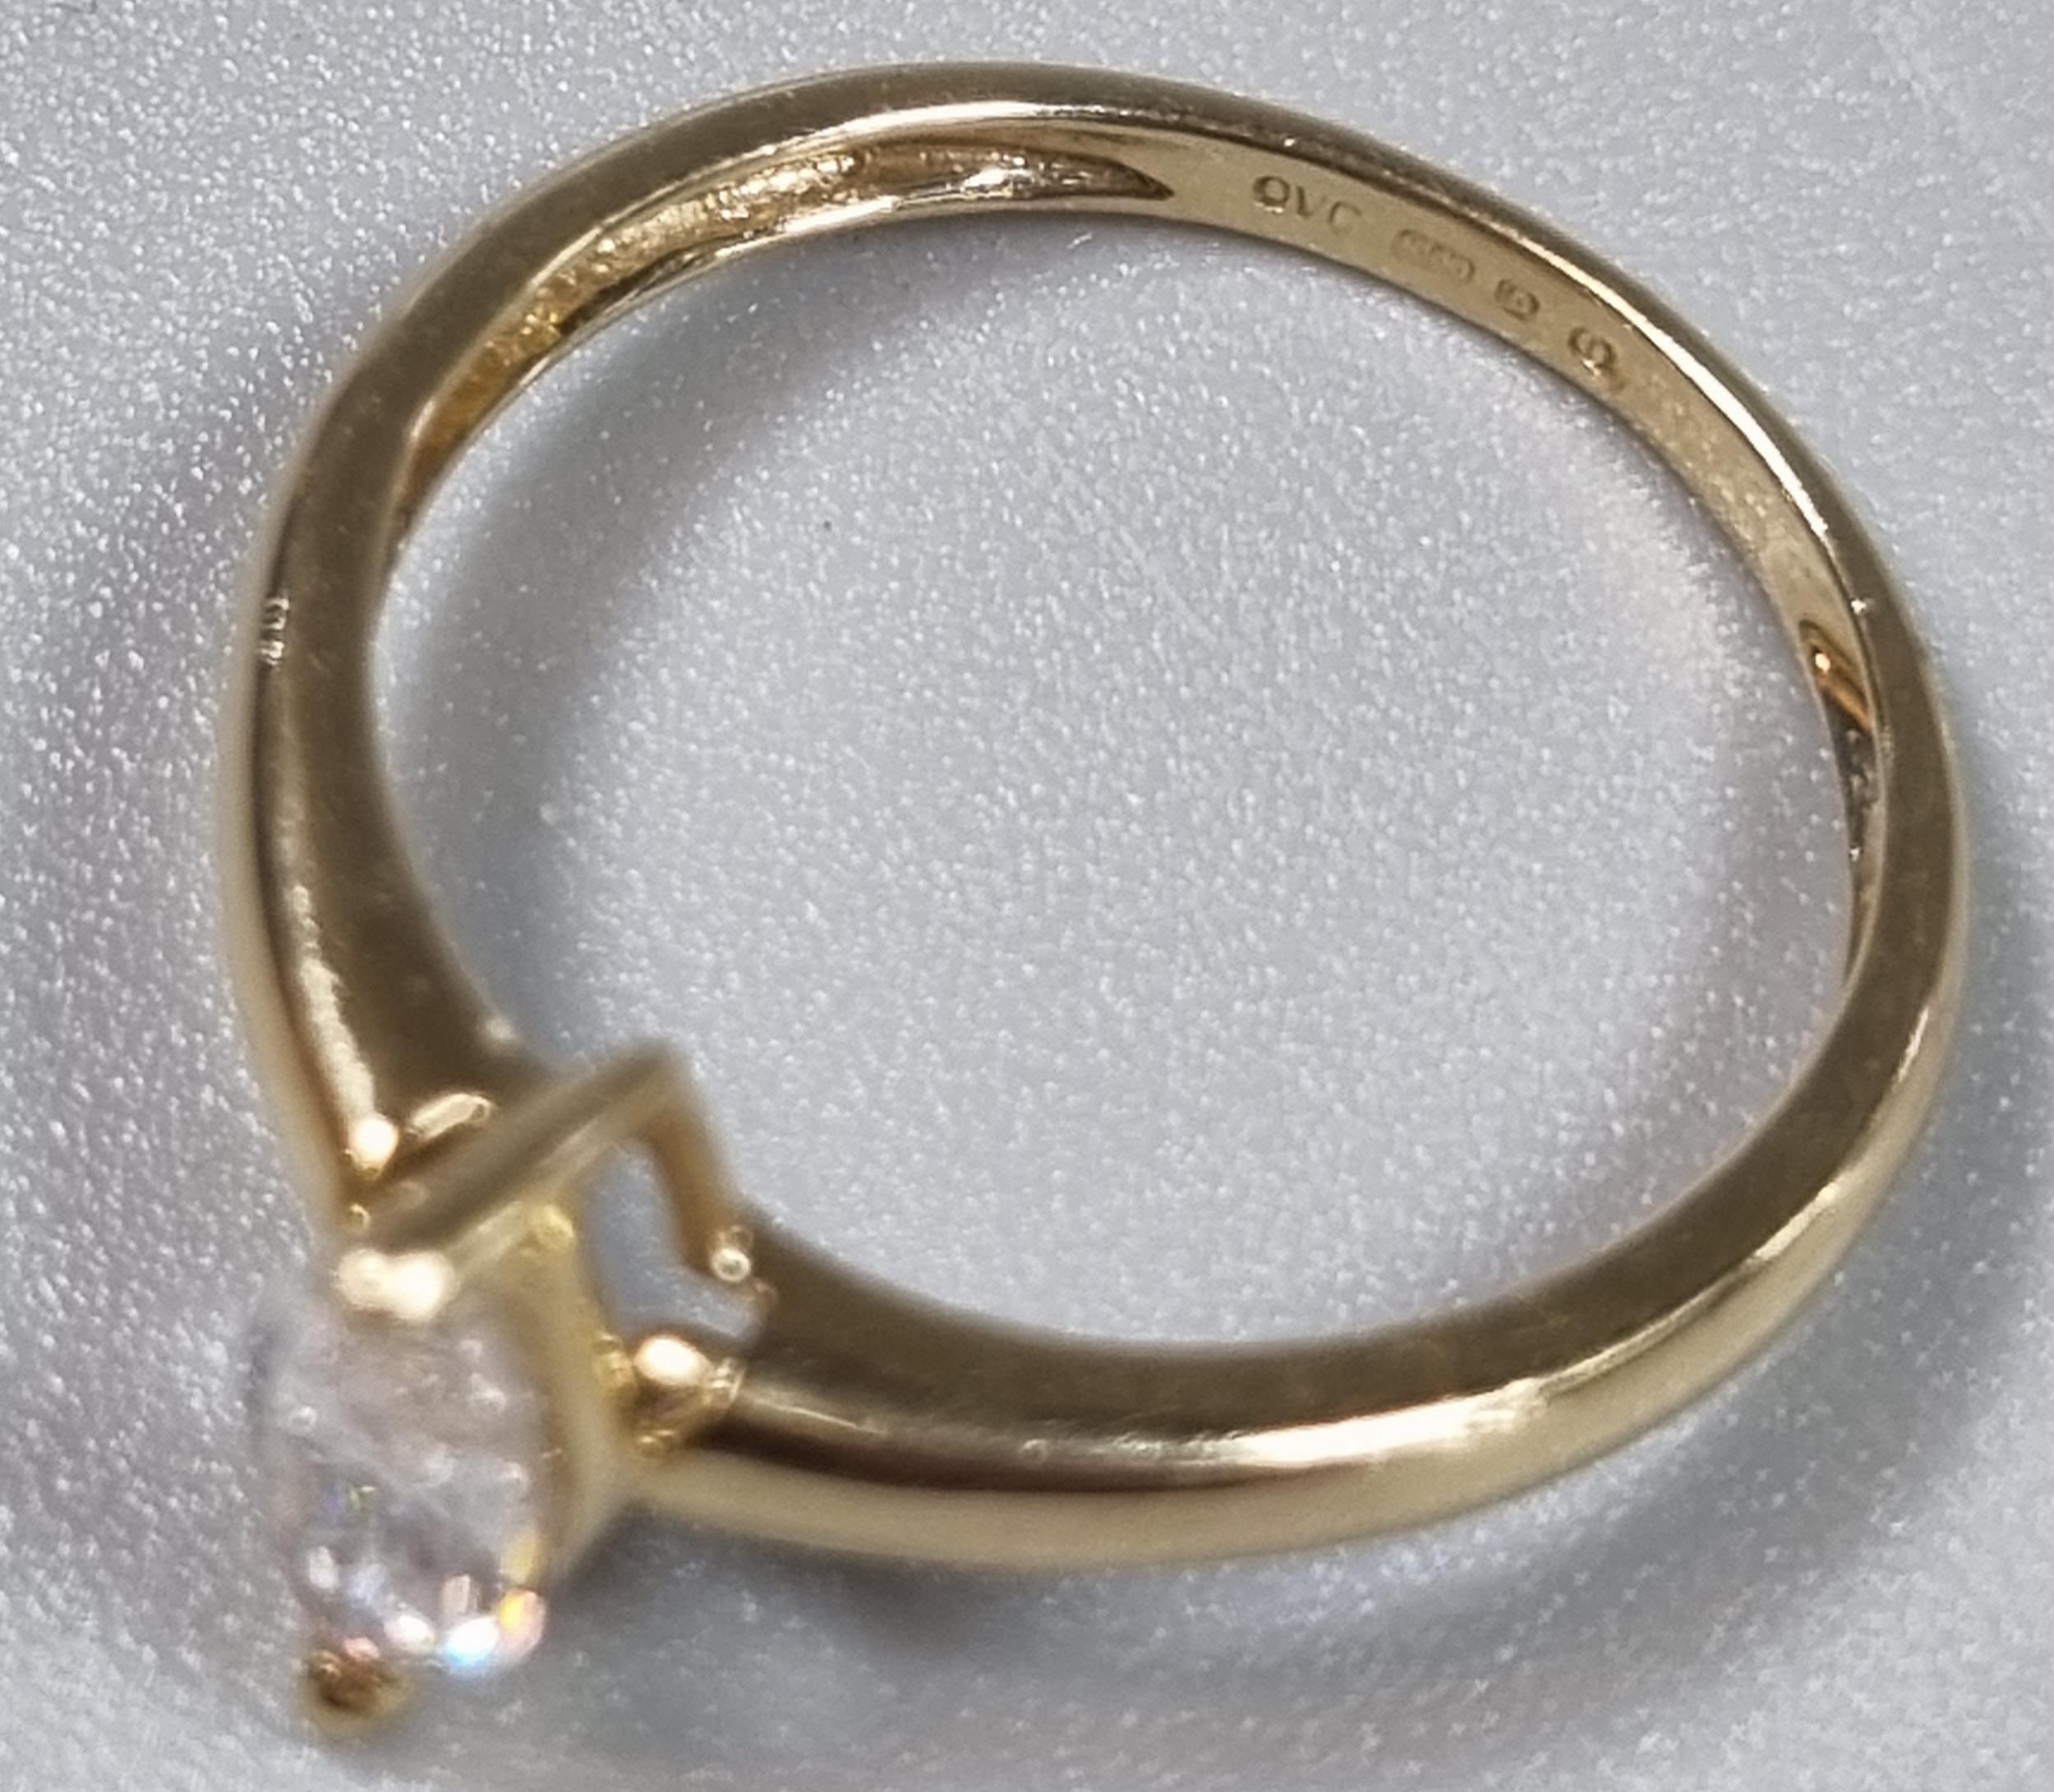 Modern 14ct gold and white stone solitaire style ring. 1.4g approx. Size J1/2. (B.P. 21% + VAT) - Image 3 of 4